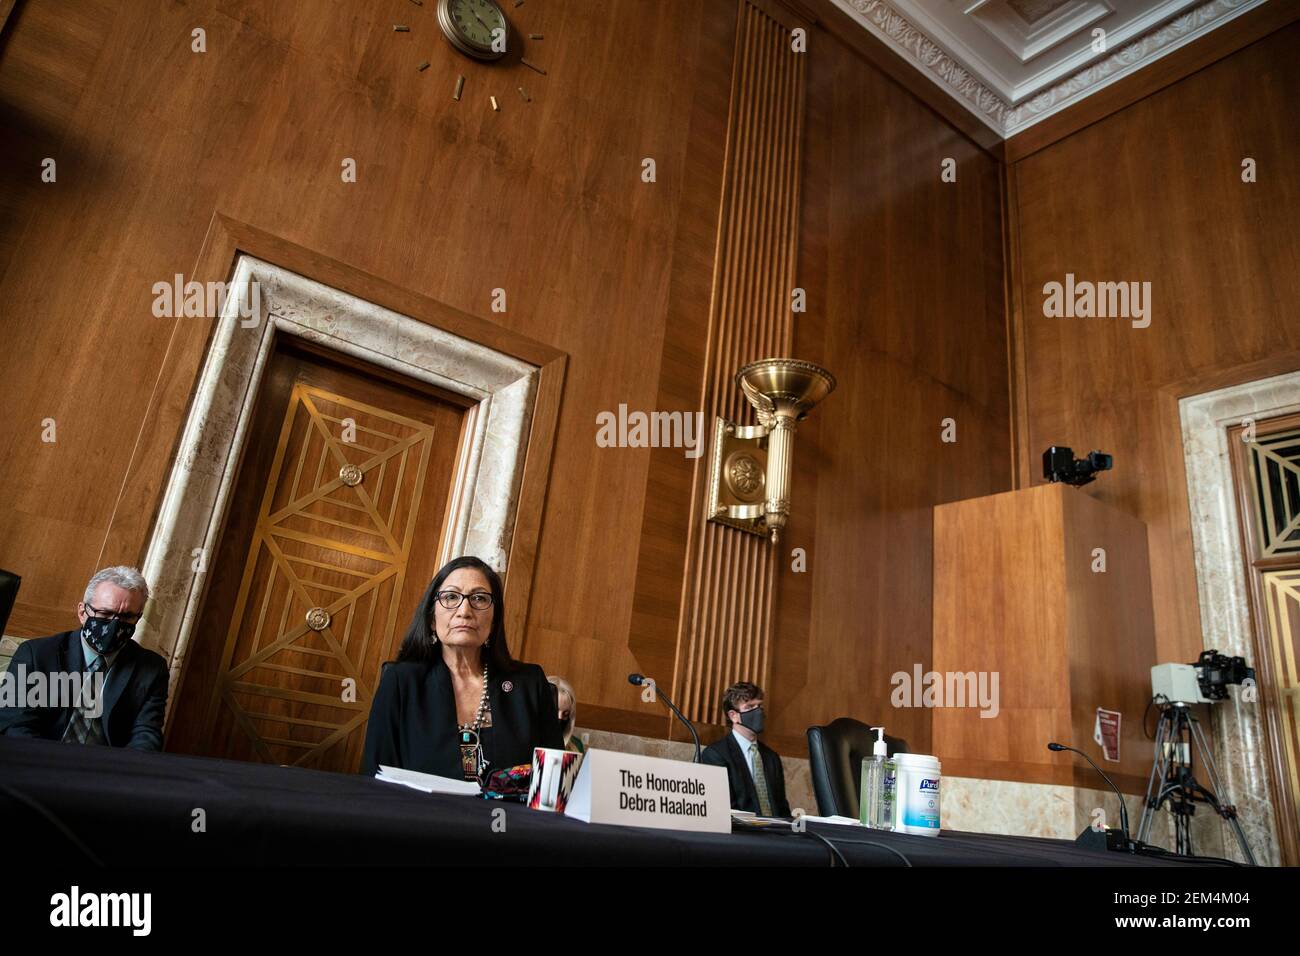 Representative Deb Haaland, a Democrat from New Mexico and secretary of the interior nominee for U.S. President Joe Biden, listens during a Senate Energy and Natural Resources Committee confirmation hearing in Washington, D.C., U.S., on Wednesday, Feb. 24, 2021. Haaland downplayed her past opposition to fracking during a heated hearing yesterday as she sought to reassure senators worried she would clamp down on fossil fuel development. Photo by Sarah Silbiger/Pool/Sipa USA) Stock Photo